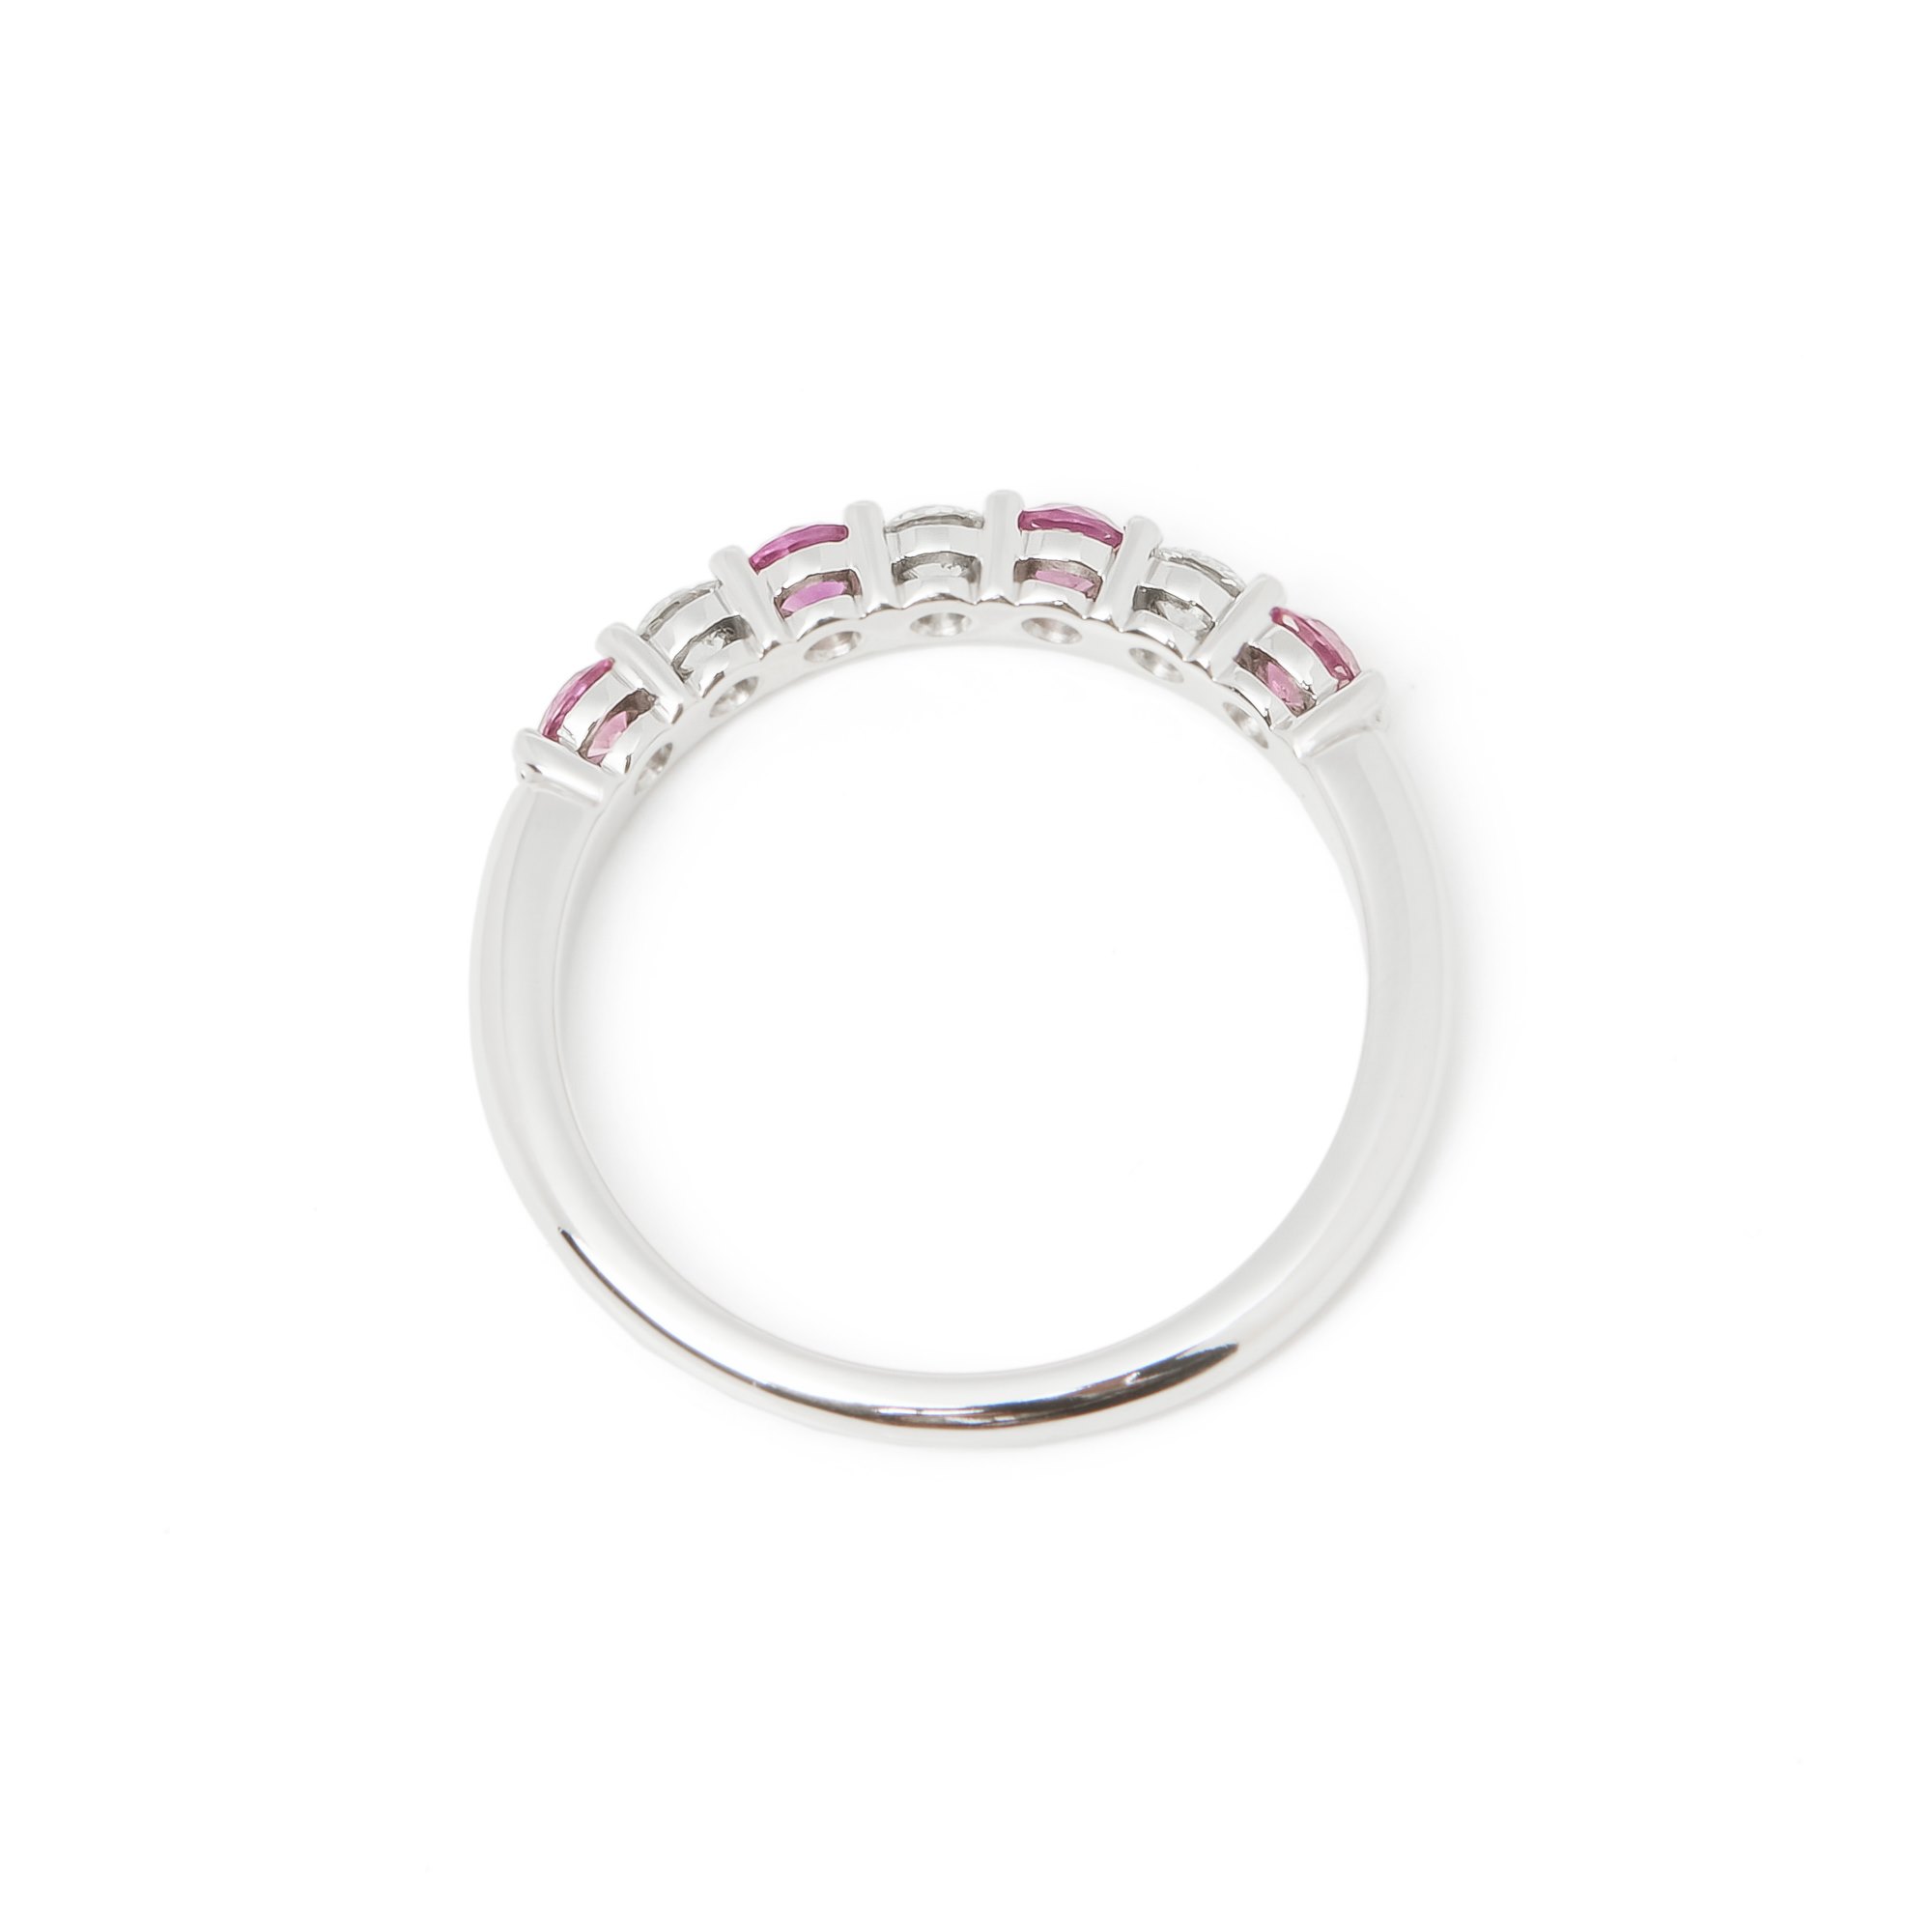 Tiffany & Co. Embrace Pink Sapphire and Diamond Eternity RIng